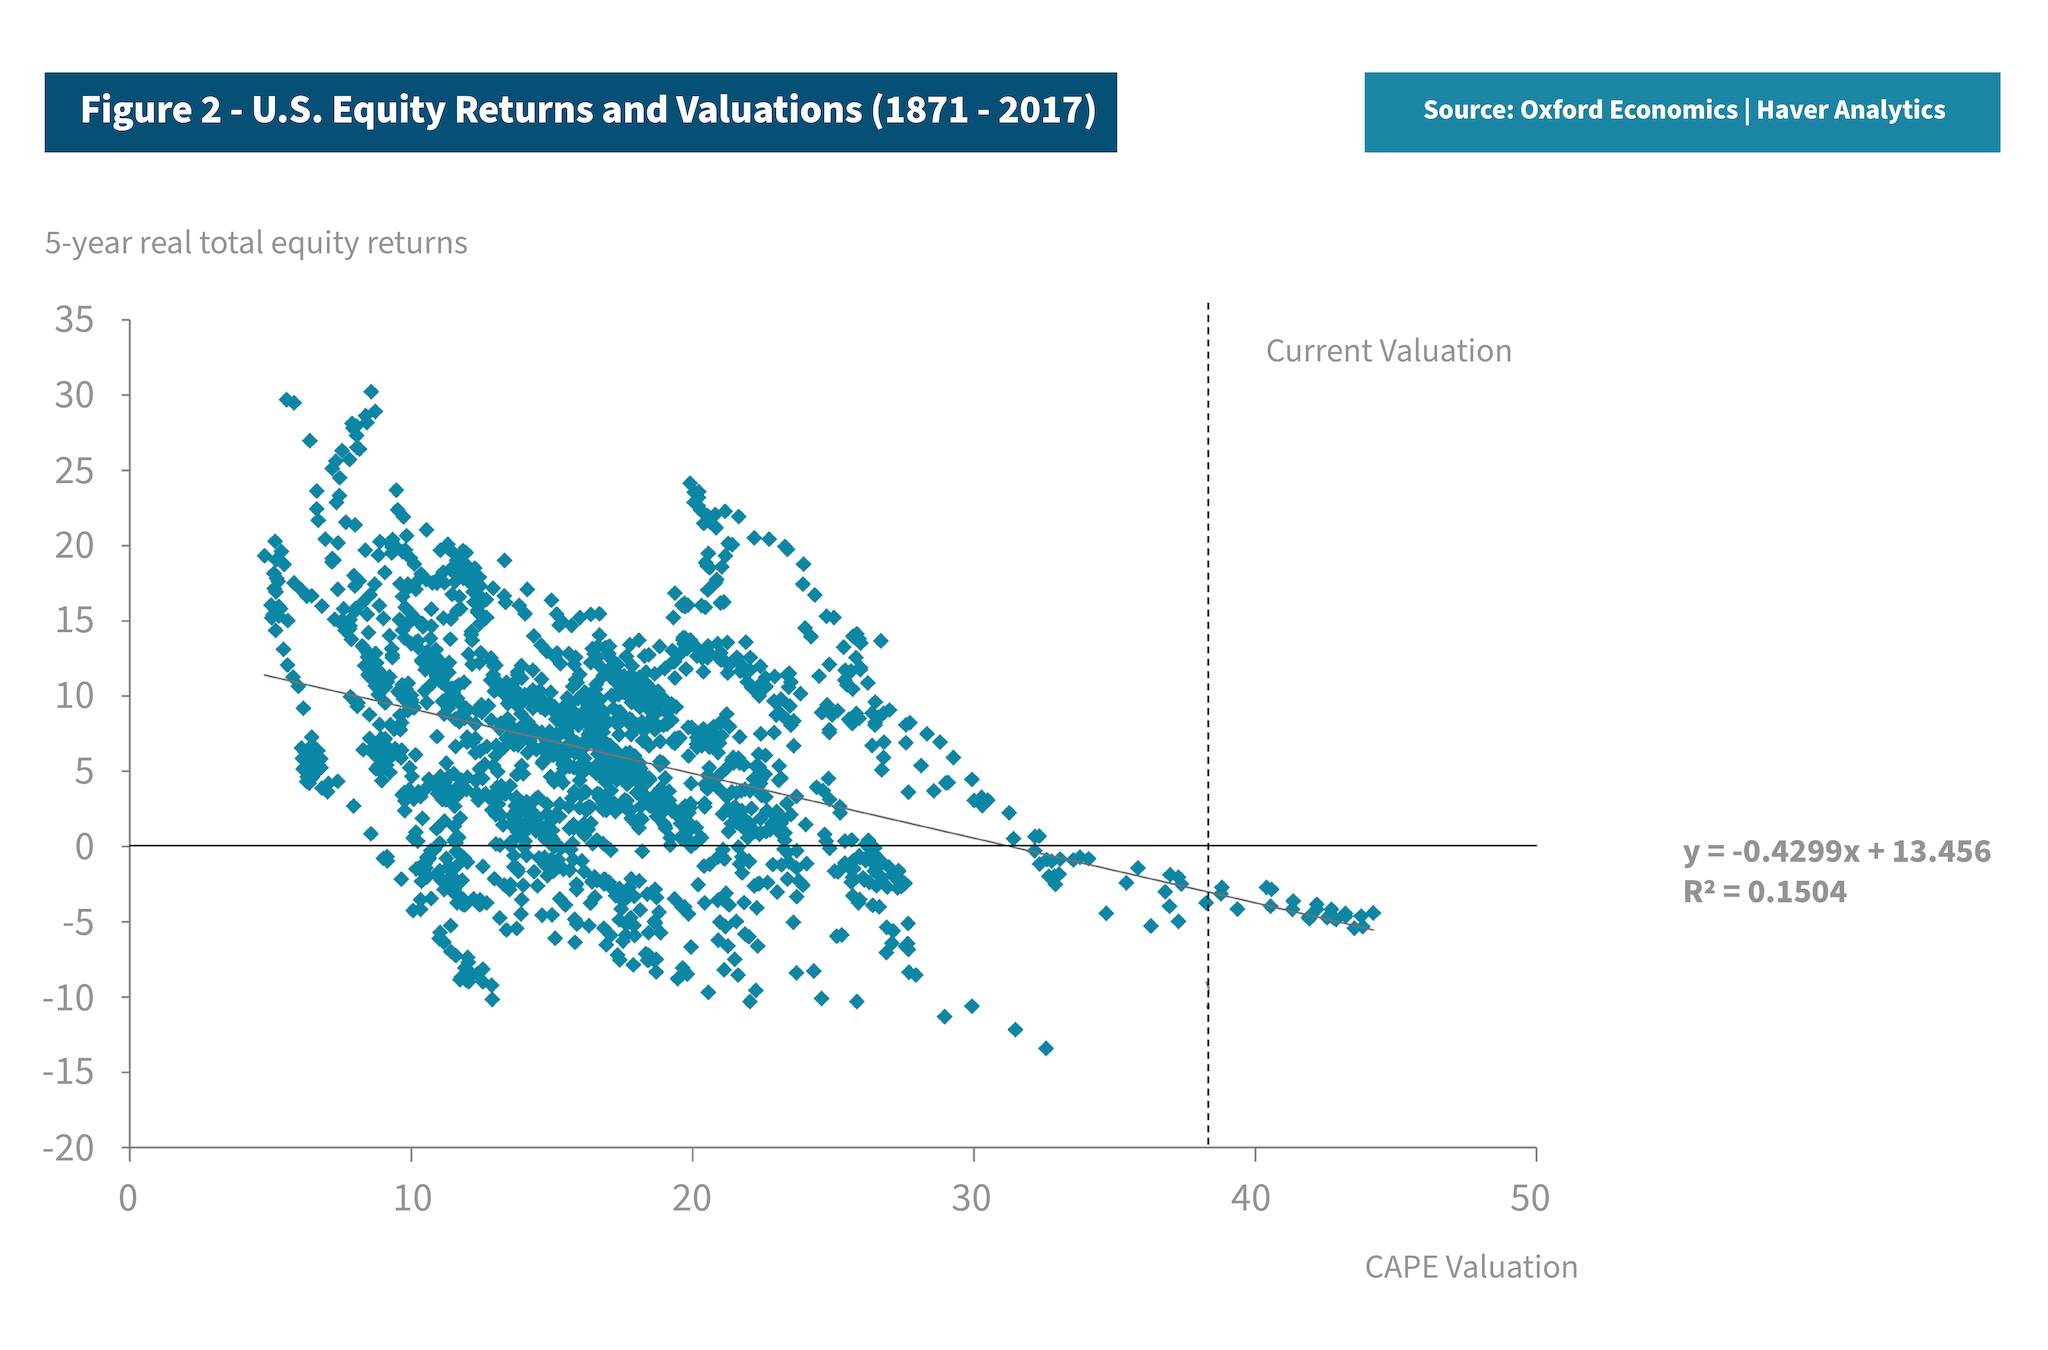 Figure 2: Graph shows historical U.S. equity returns and valuations from 1871-2017.